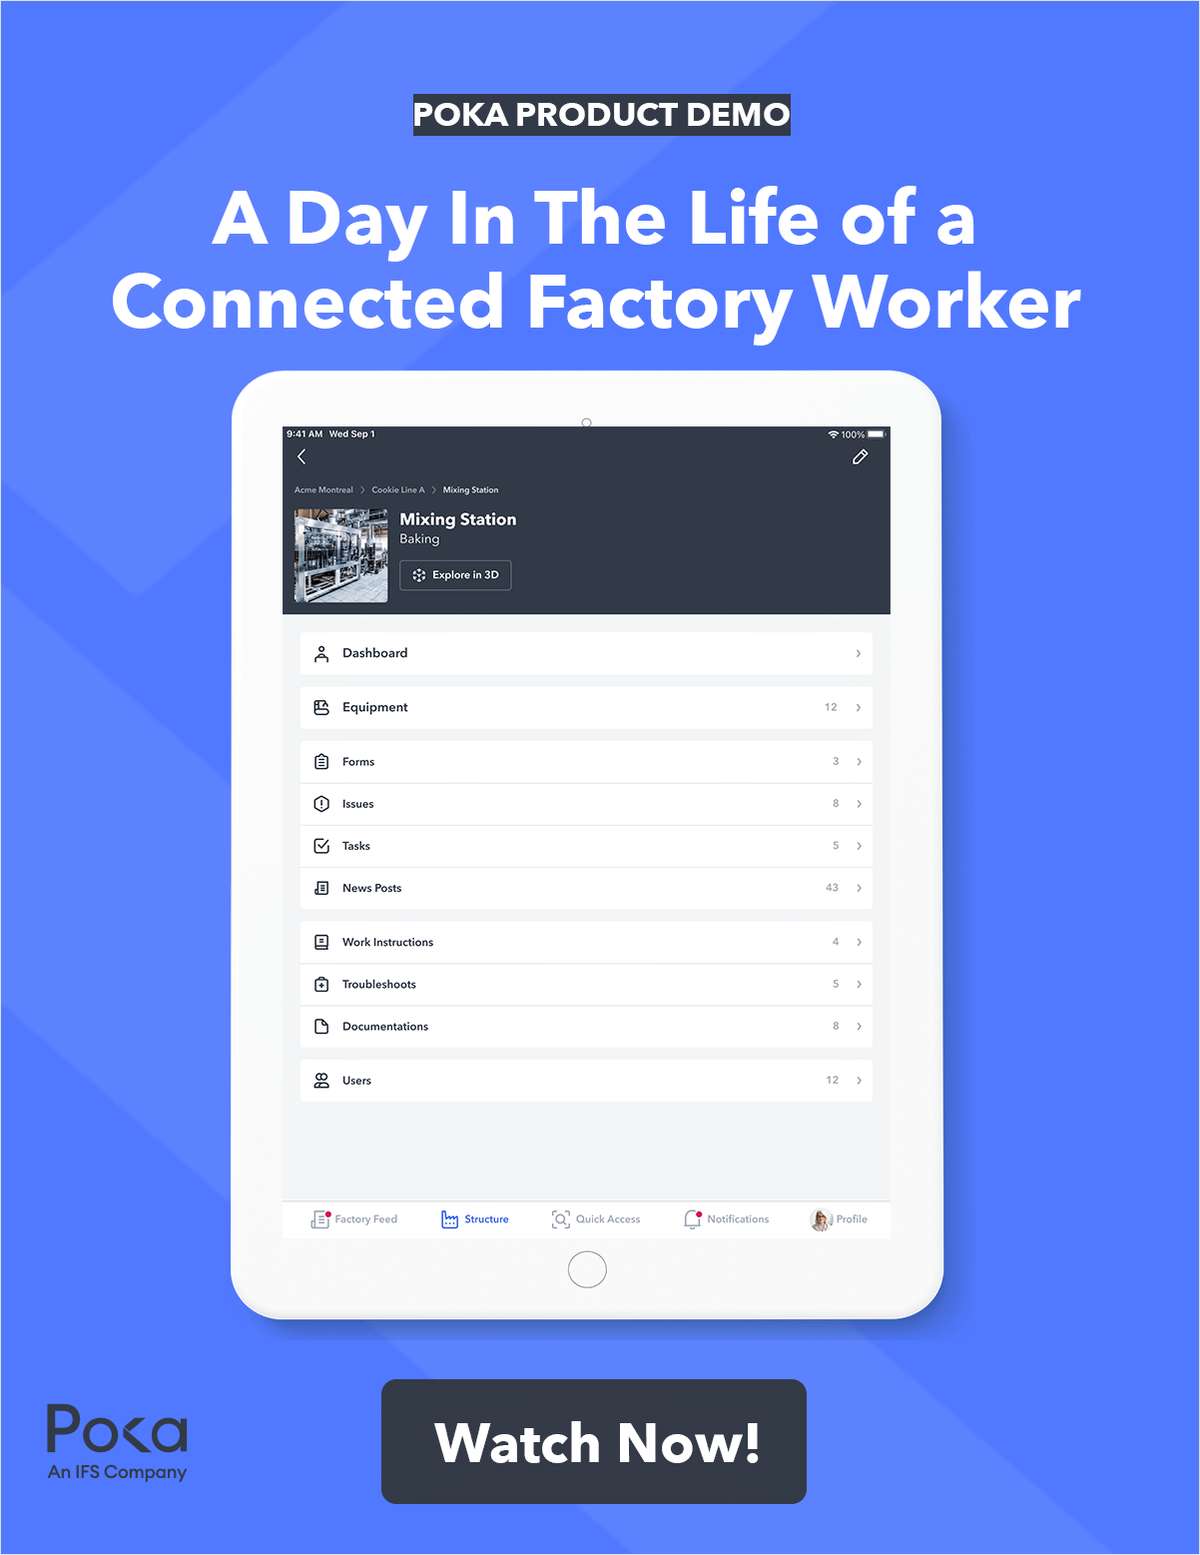 The leading connected worker platform for food manufacturers